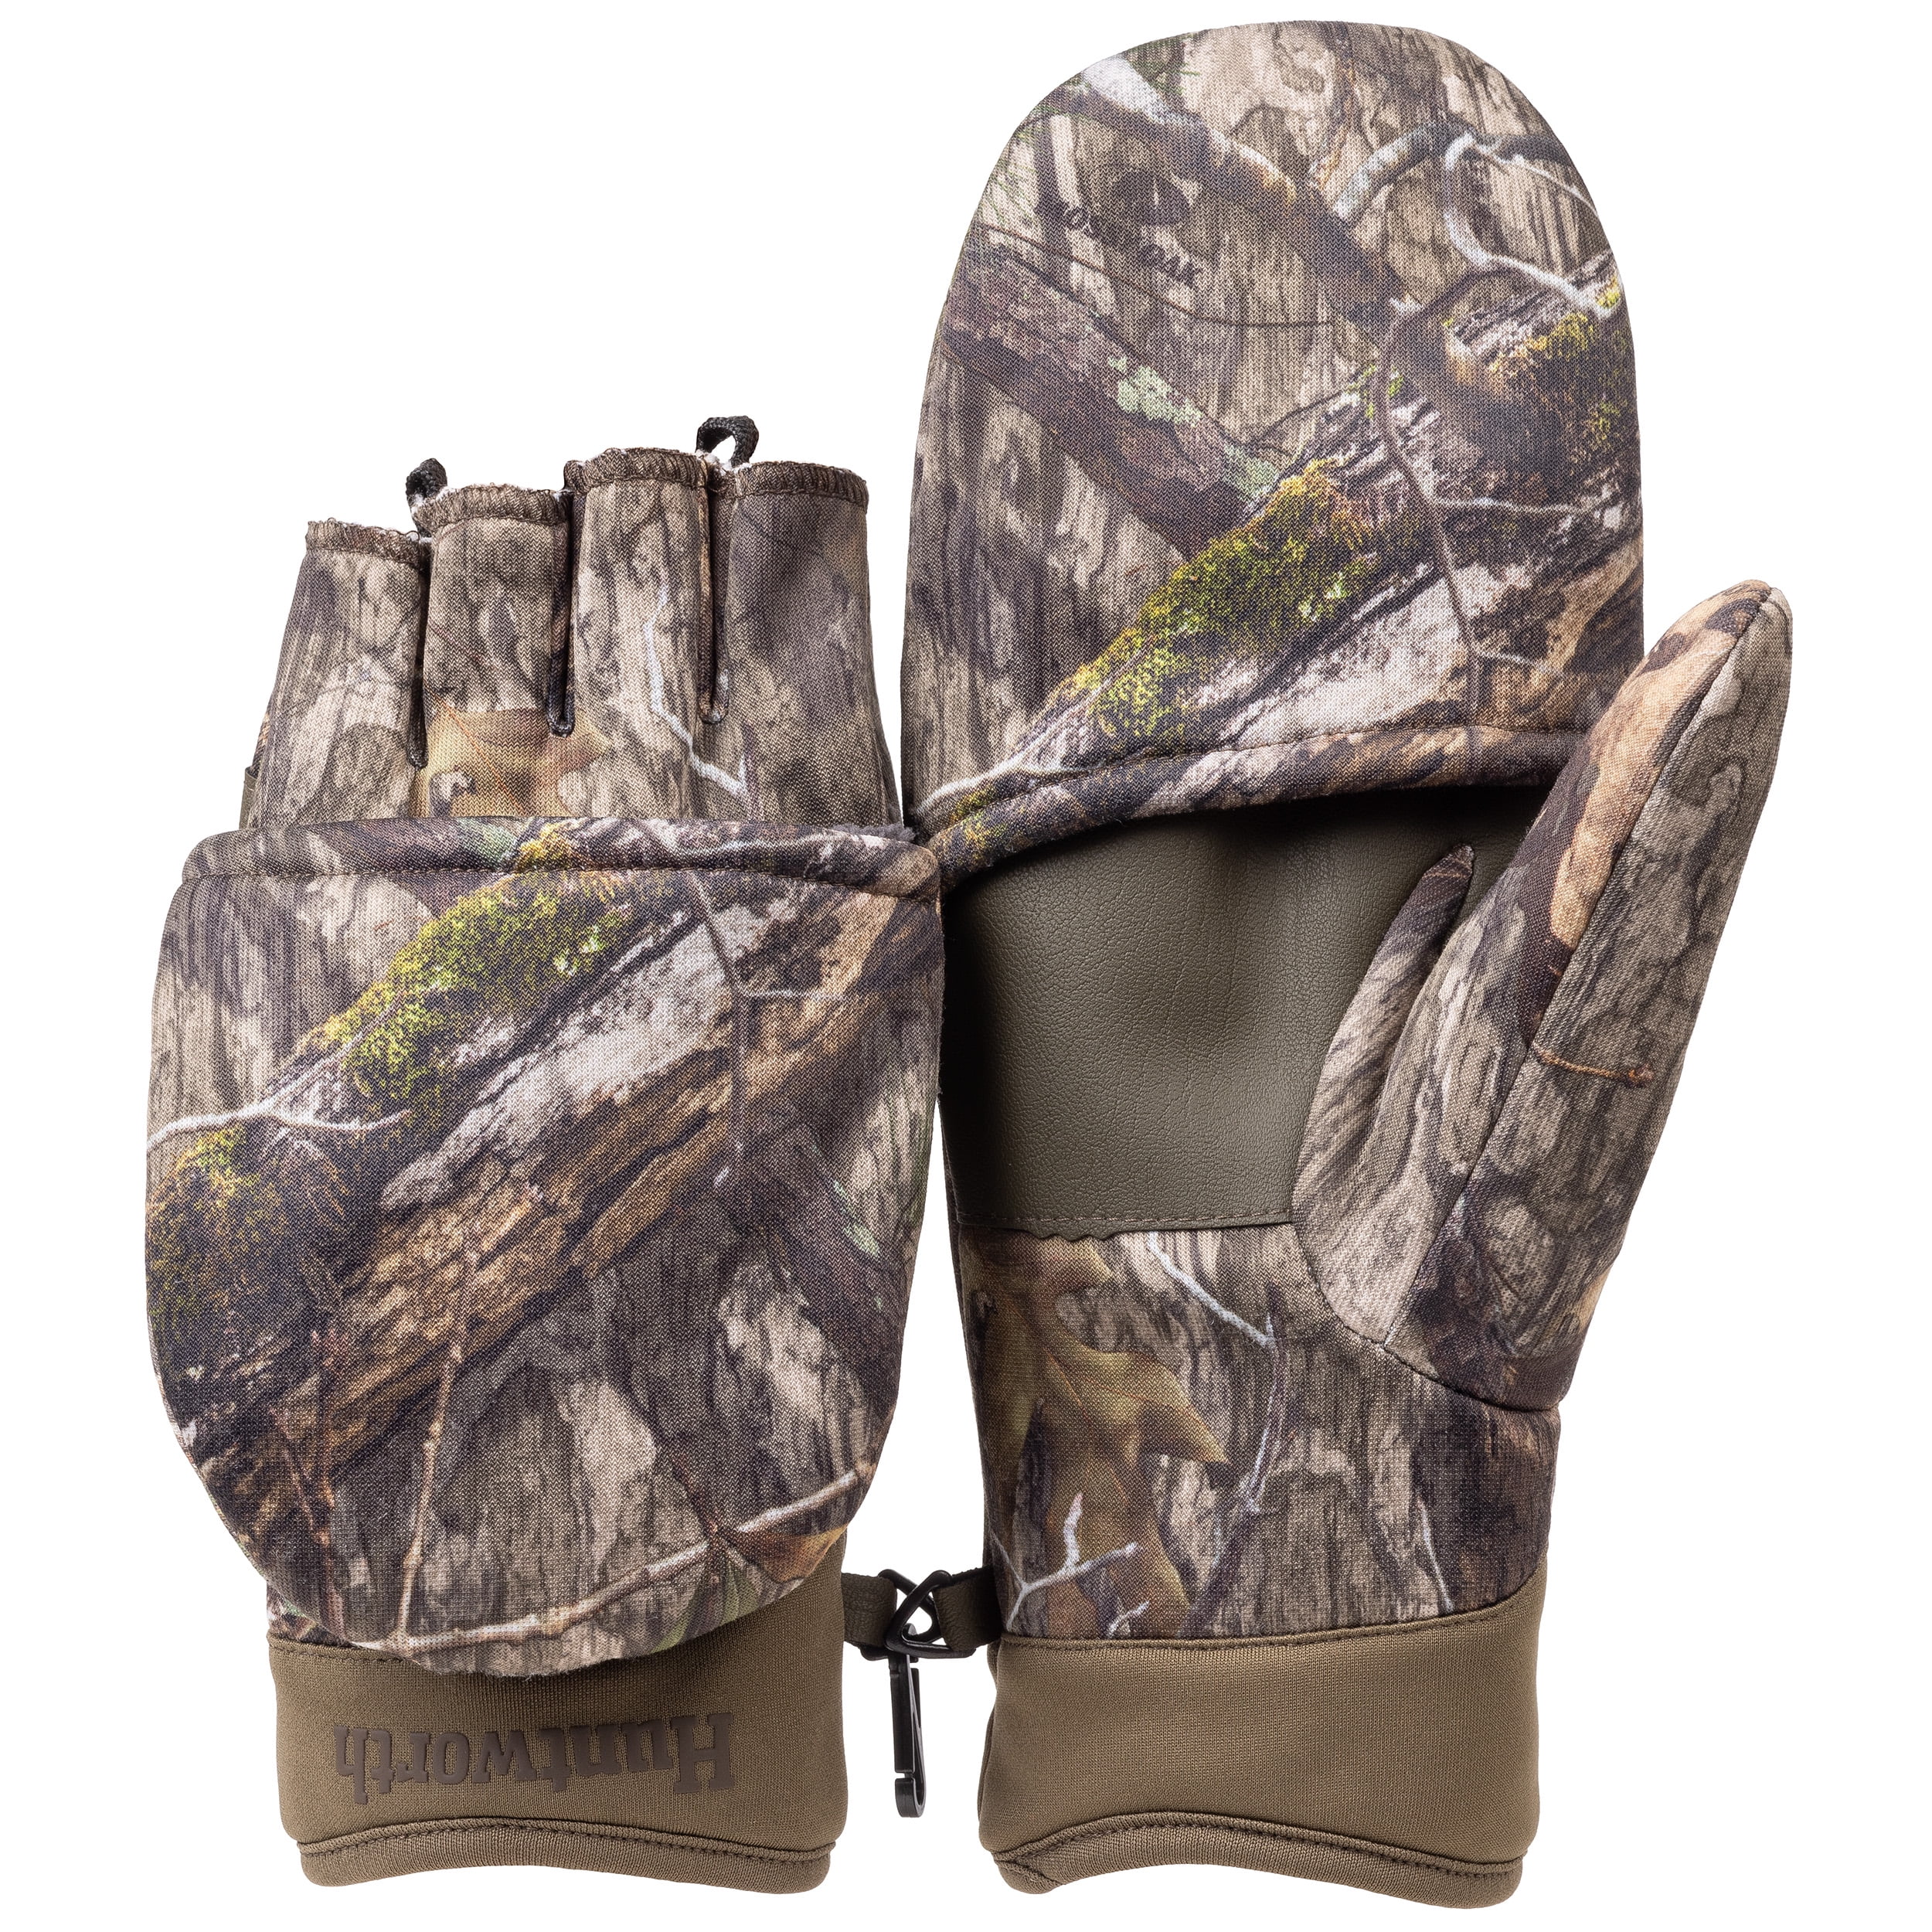 Hunworth Men's: Scout Heat Boost Lined Hunting Pop Top Gloves $12.94, Renegade Midweight 4-in-1 Adjustable Balaclava $6.49, More + Free S&H w/ Walmart+ or $35+